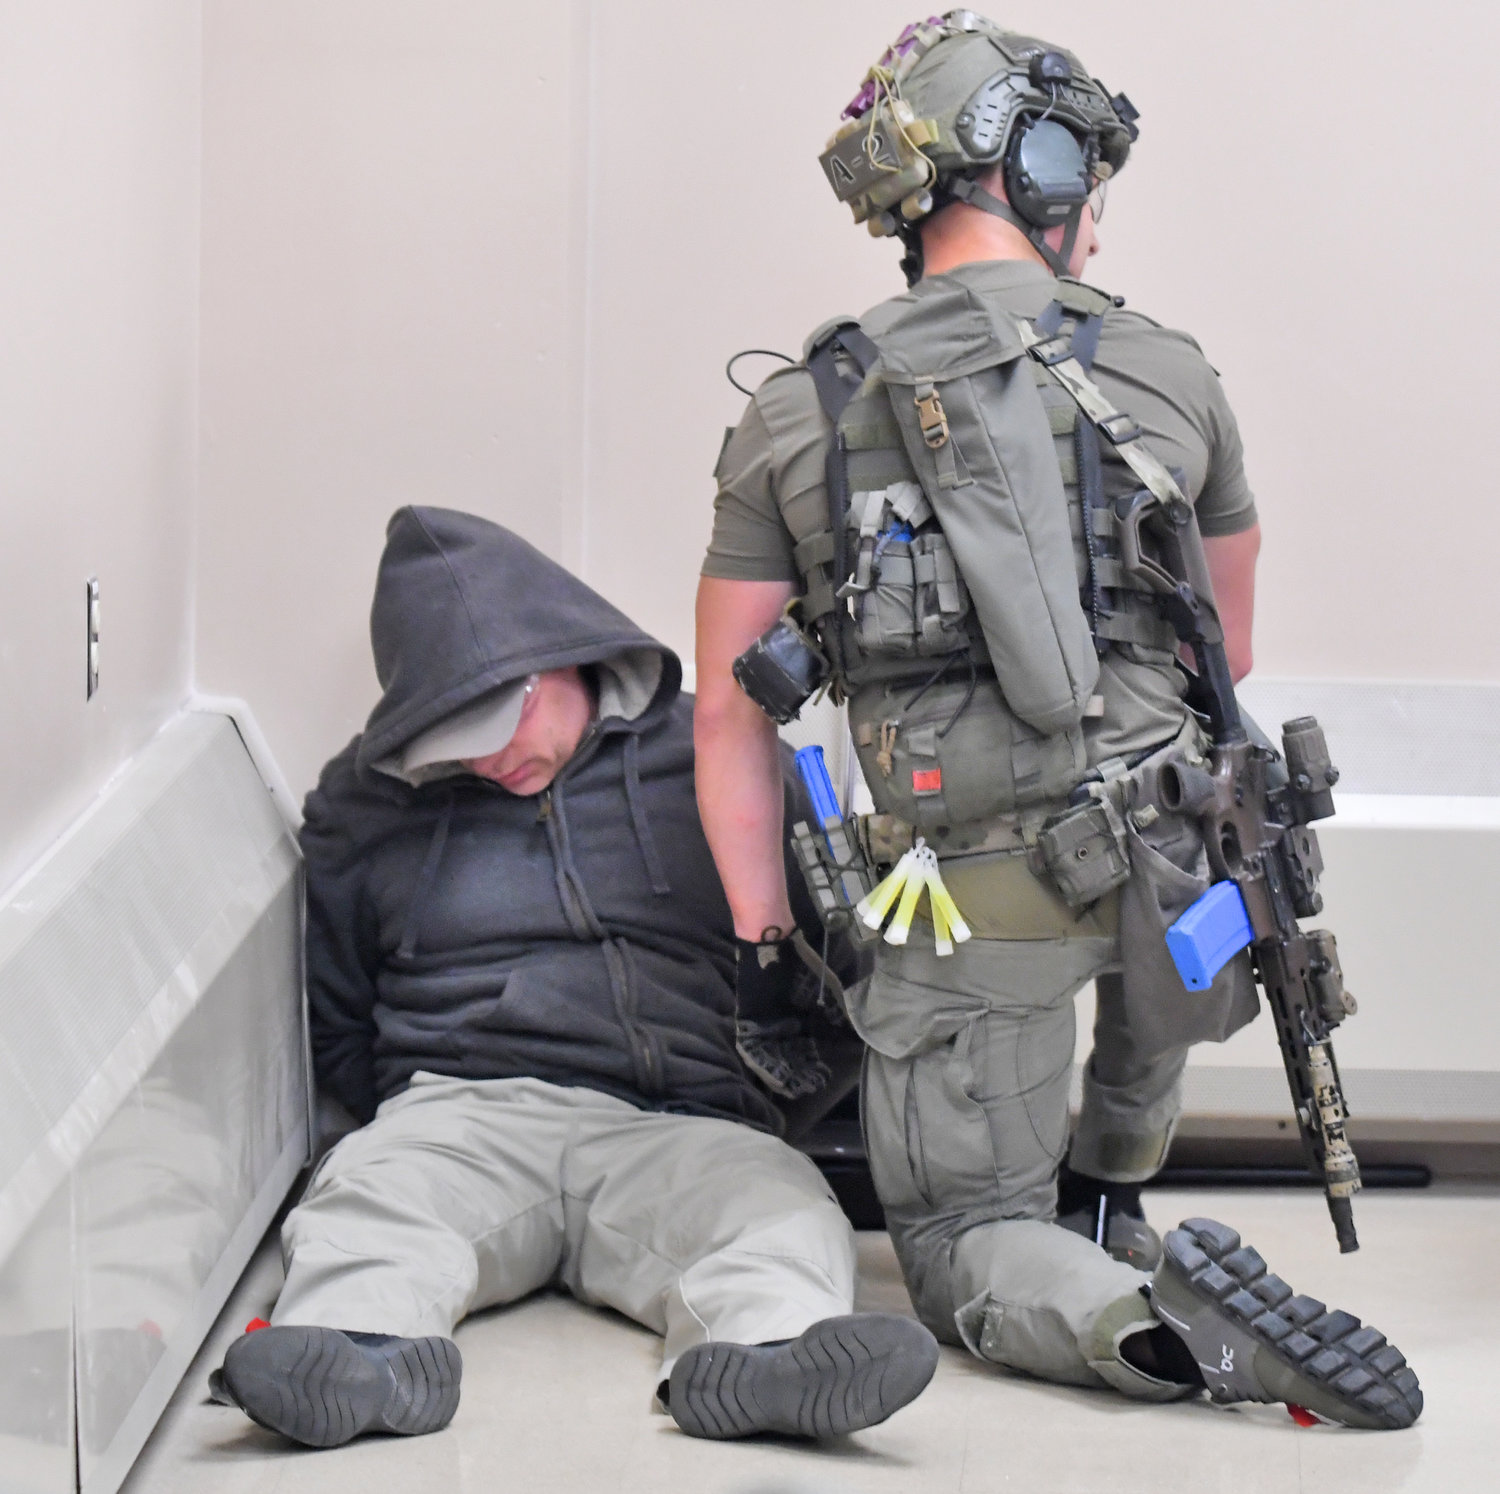 A member of the Erie County Sheriff's SWAT team keeps watch over a shooting suspect during a training session at the New York State Preparedness Training Center in Whitestown.